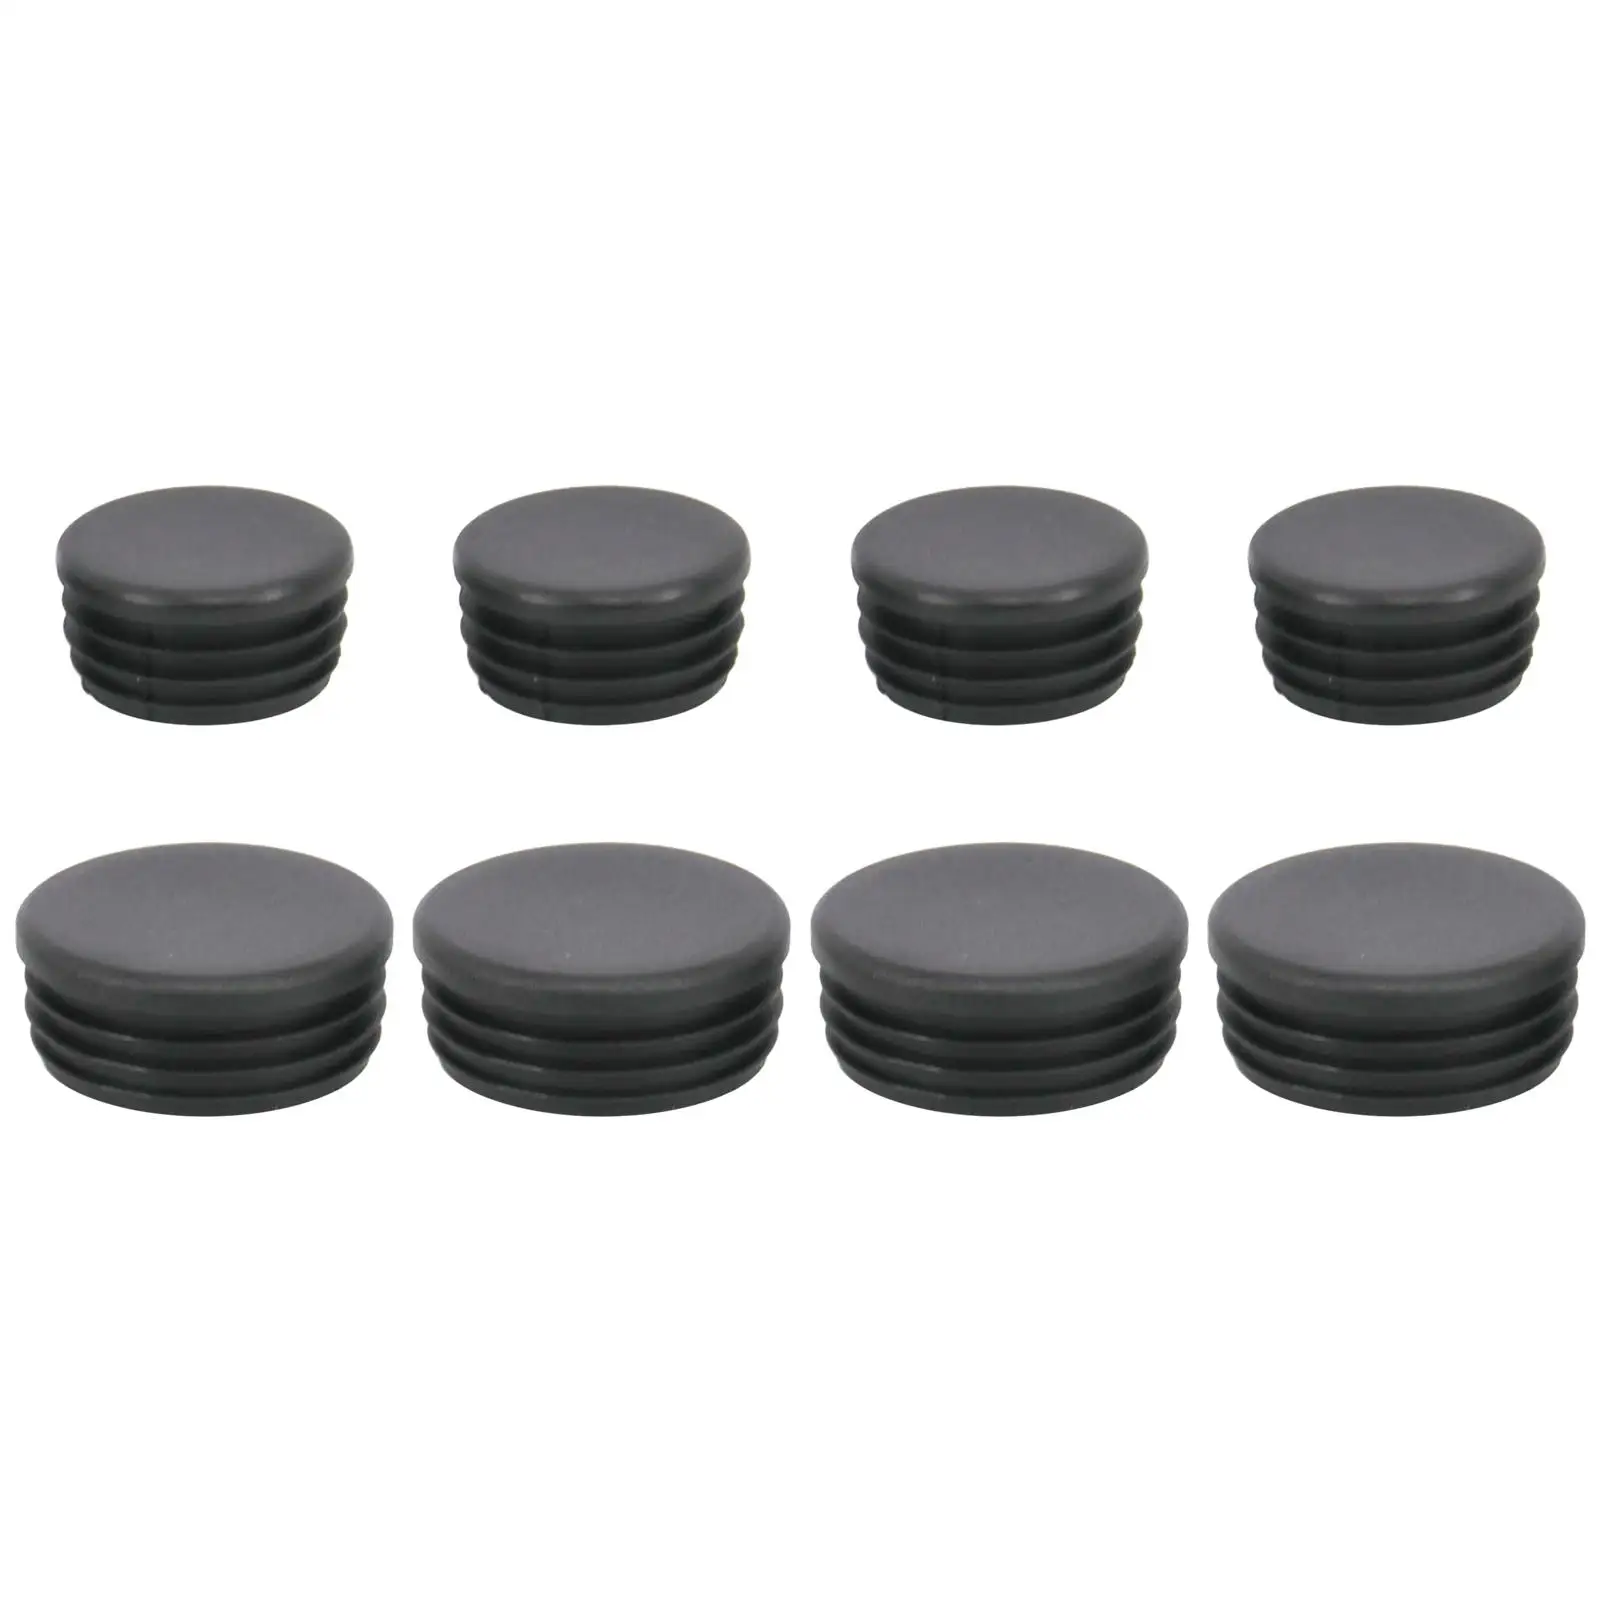 8Pcs Waterproof Chassis Plug Covers Dustproof Auto Parts Protect Covers Plug Hole Covers Fit for Suzuki Jimny Jb64 Jb74 18-Up